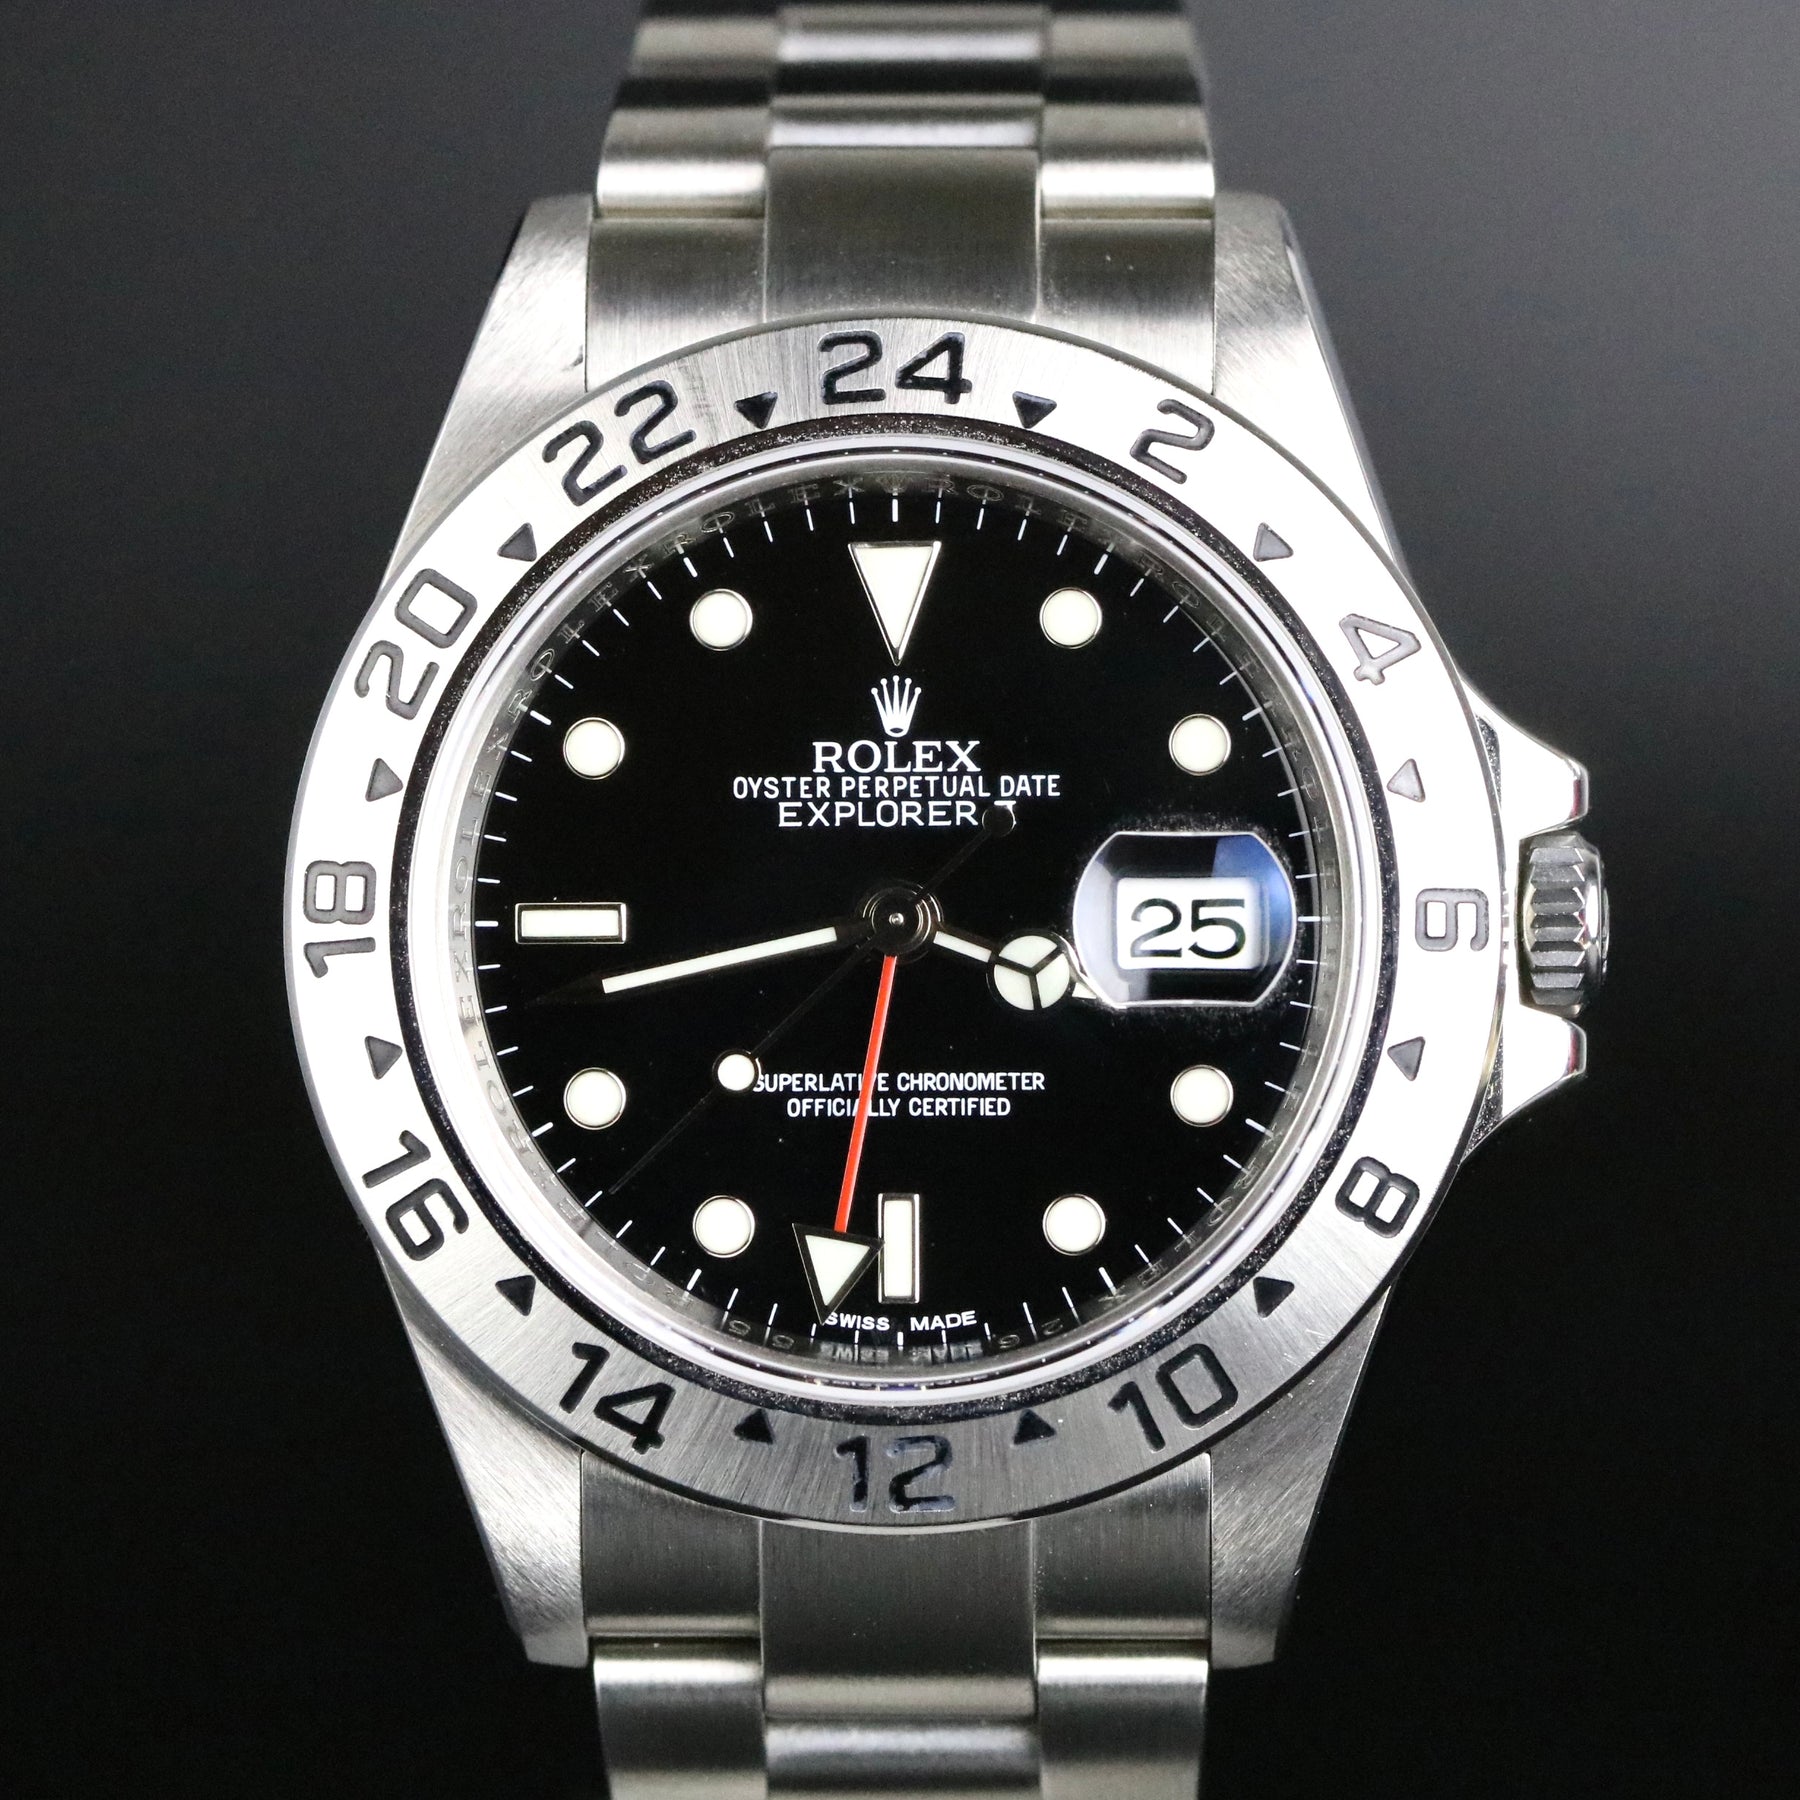 2012 Rolex 16570 Explorer II Black Dial 3186 Movement with Box & Papers